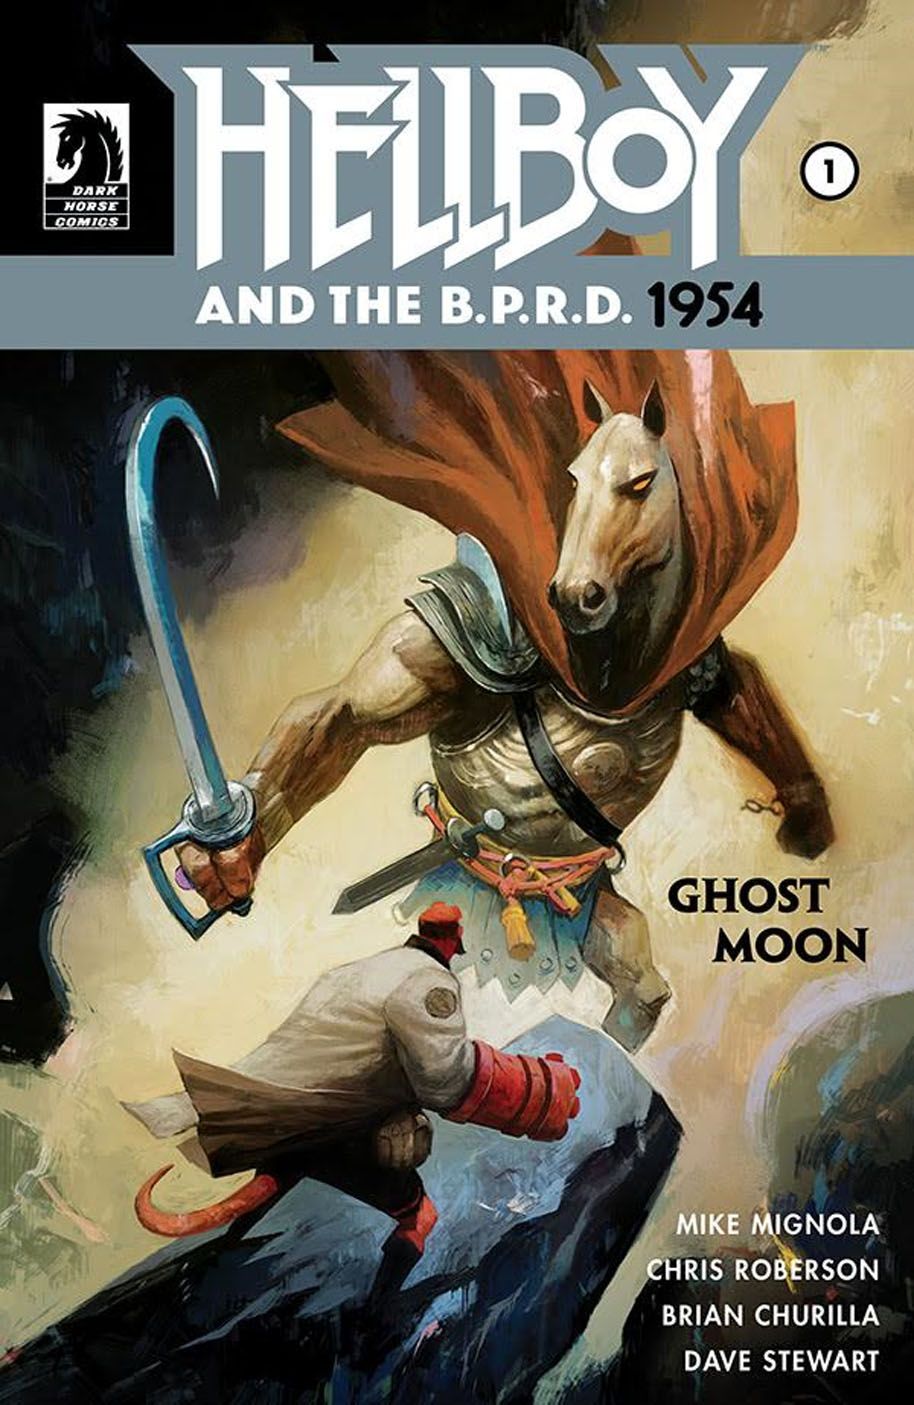 Hellboy and the B.P.R.D.: 1954 – Ghost Moon